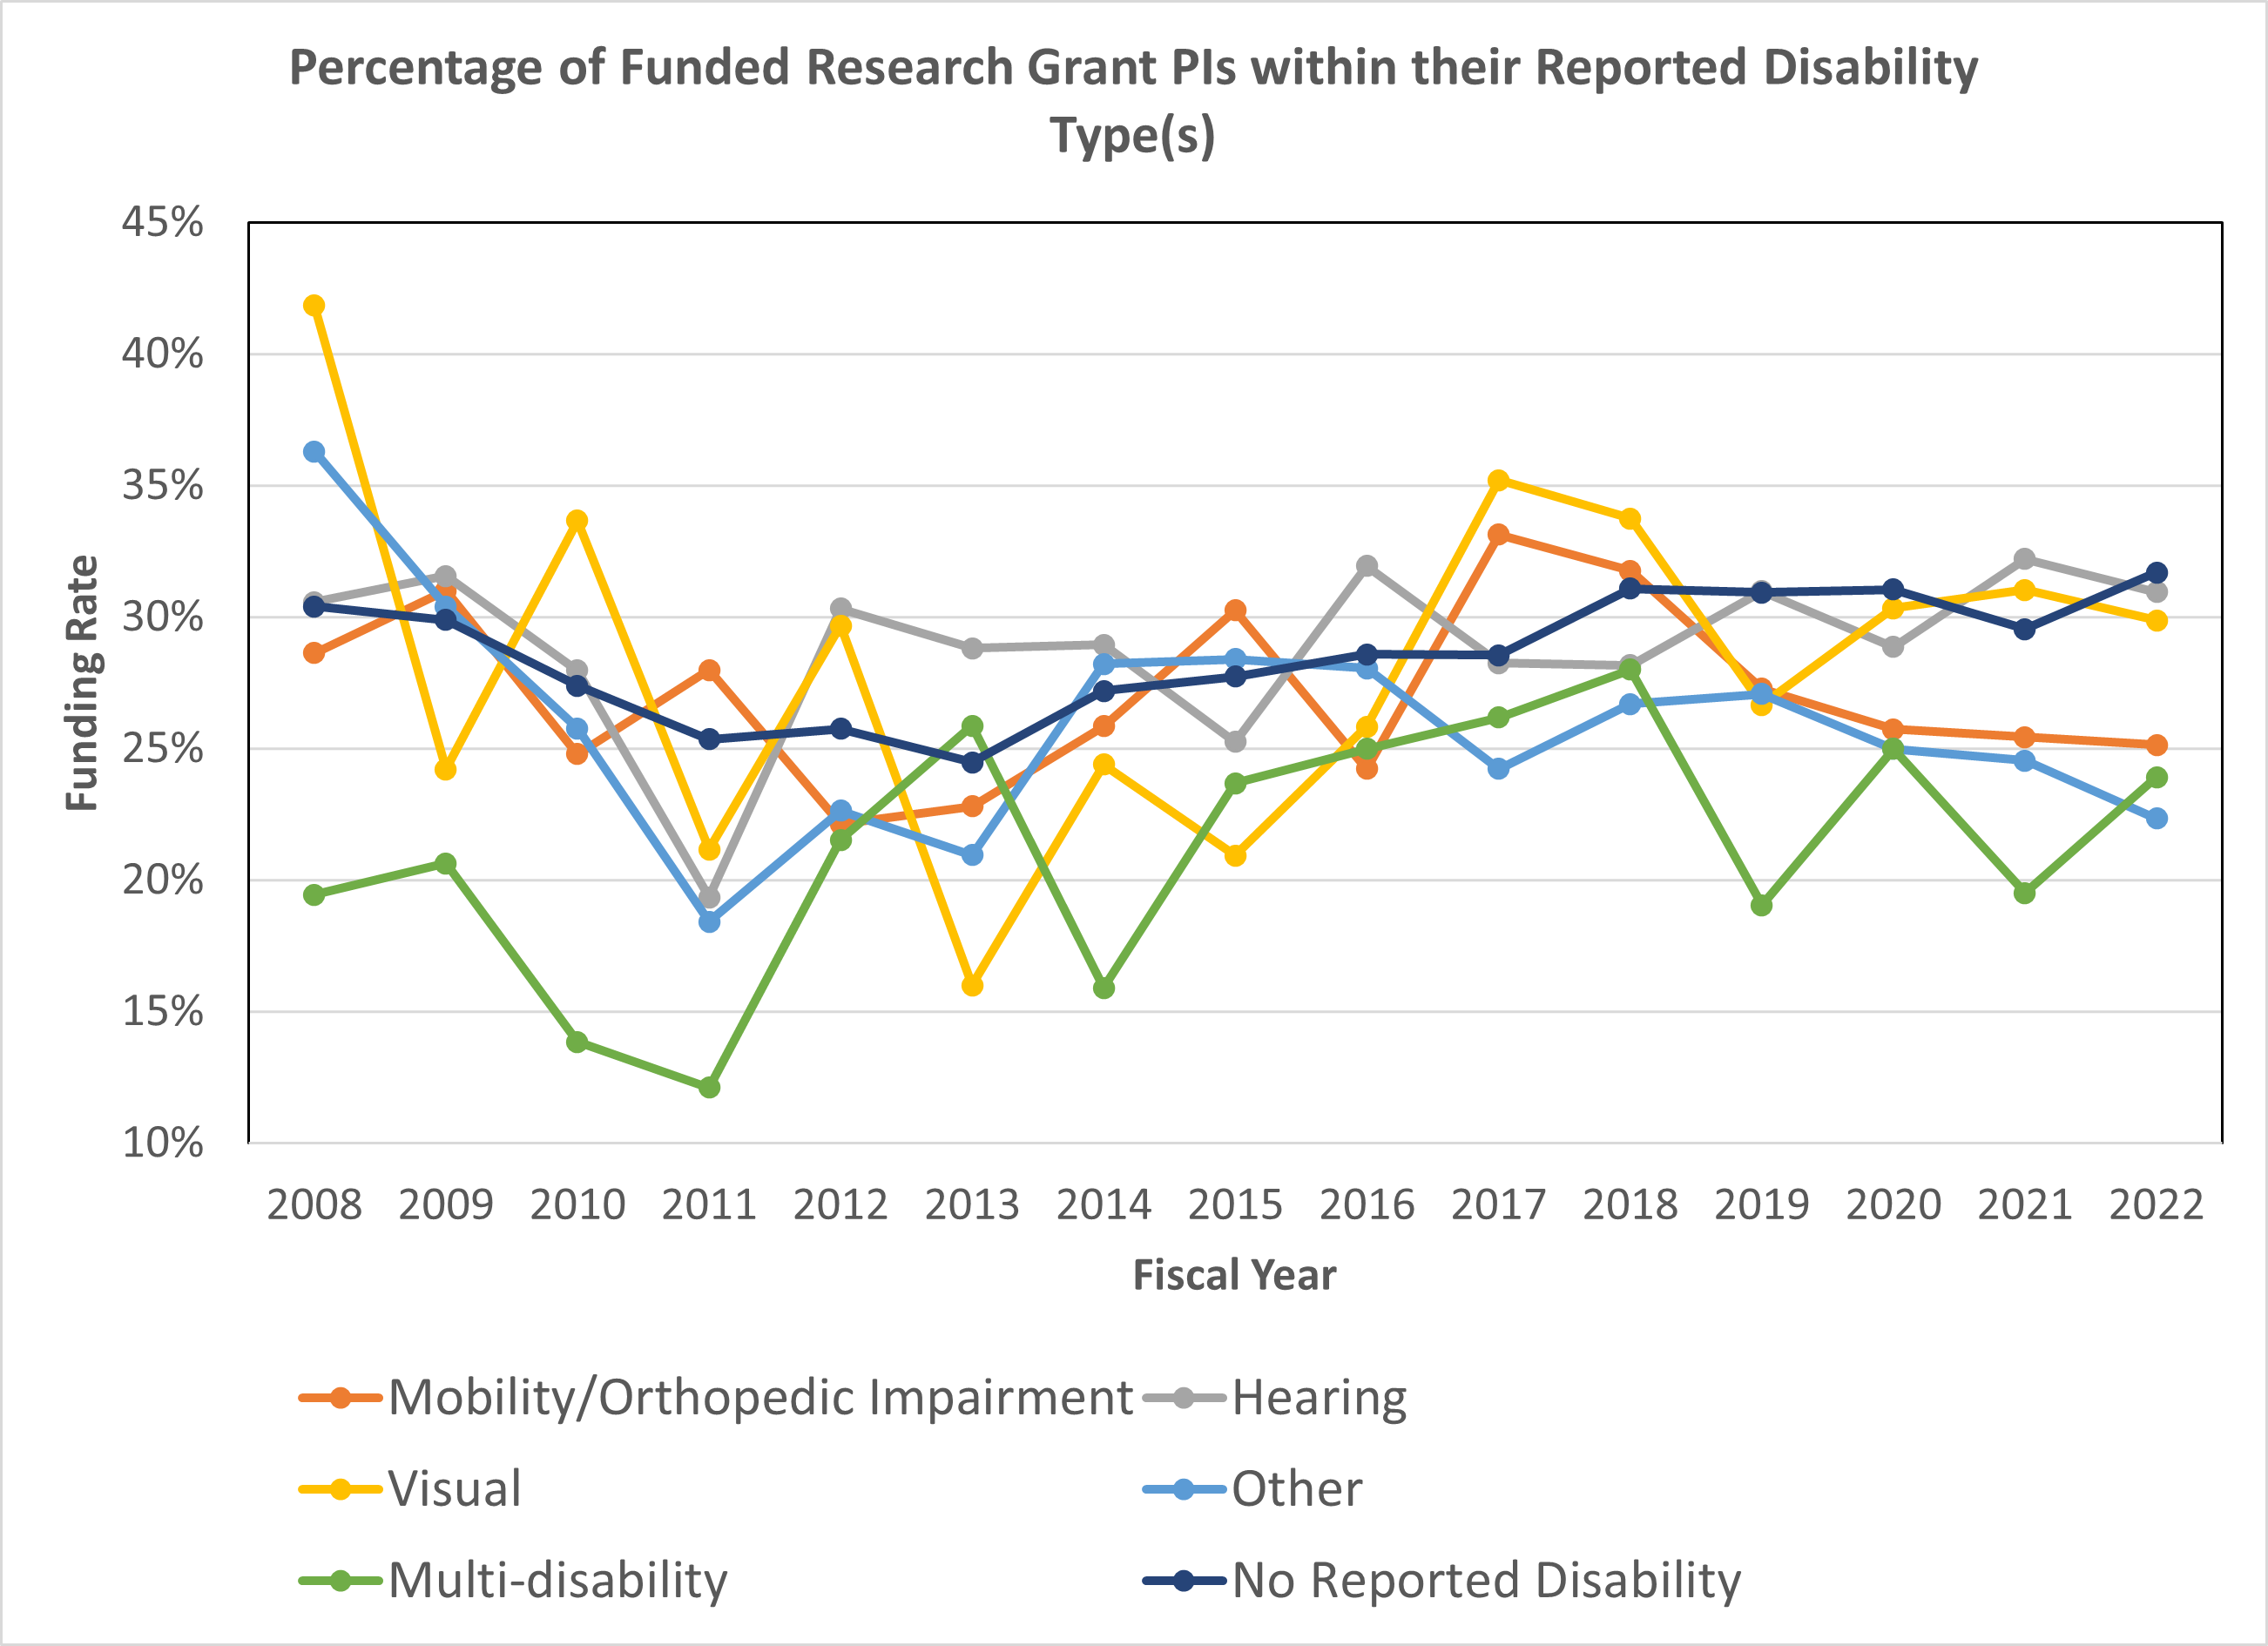 Figure 1 is a line graph displaying the percentage of funded research grant PIs broken down by disability type. The X axis is fiscal year from 2008 to 2022, while the Y axis is the funding rate percentage from 10 to 45. Researchers with mobility/orthopedic disabilities are represented in the orange line, visual disability in the yellow line, hearing disability in the gray line, other disabilities in the light blue line, multiple disabilities in the green line, and no reported disability in the dark blue line.